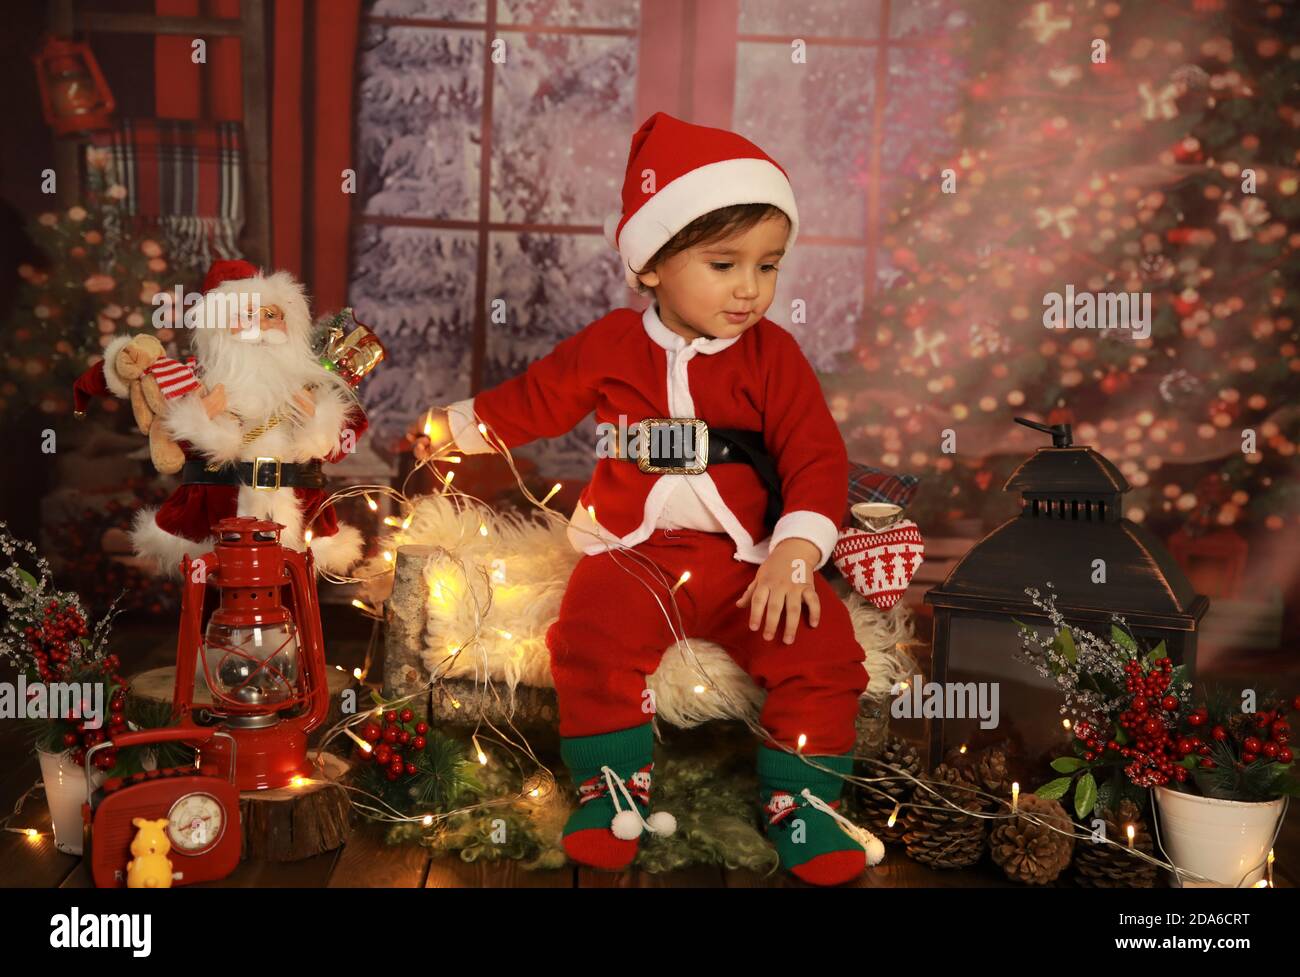 Child in Santa Claus costume, Christmas, Happy New Year 2021 Stock Photo